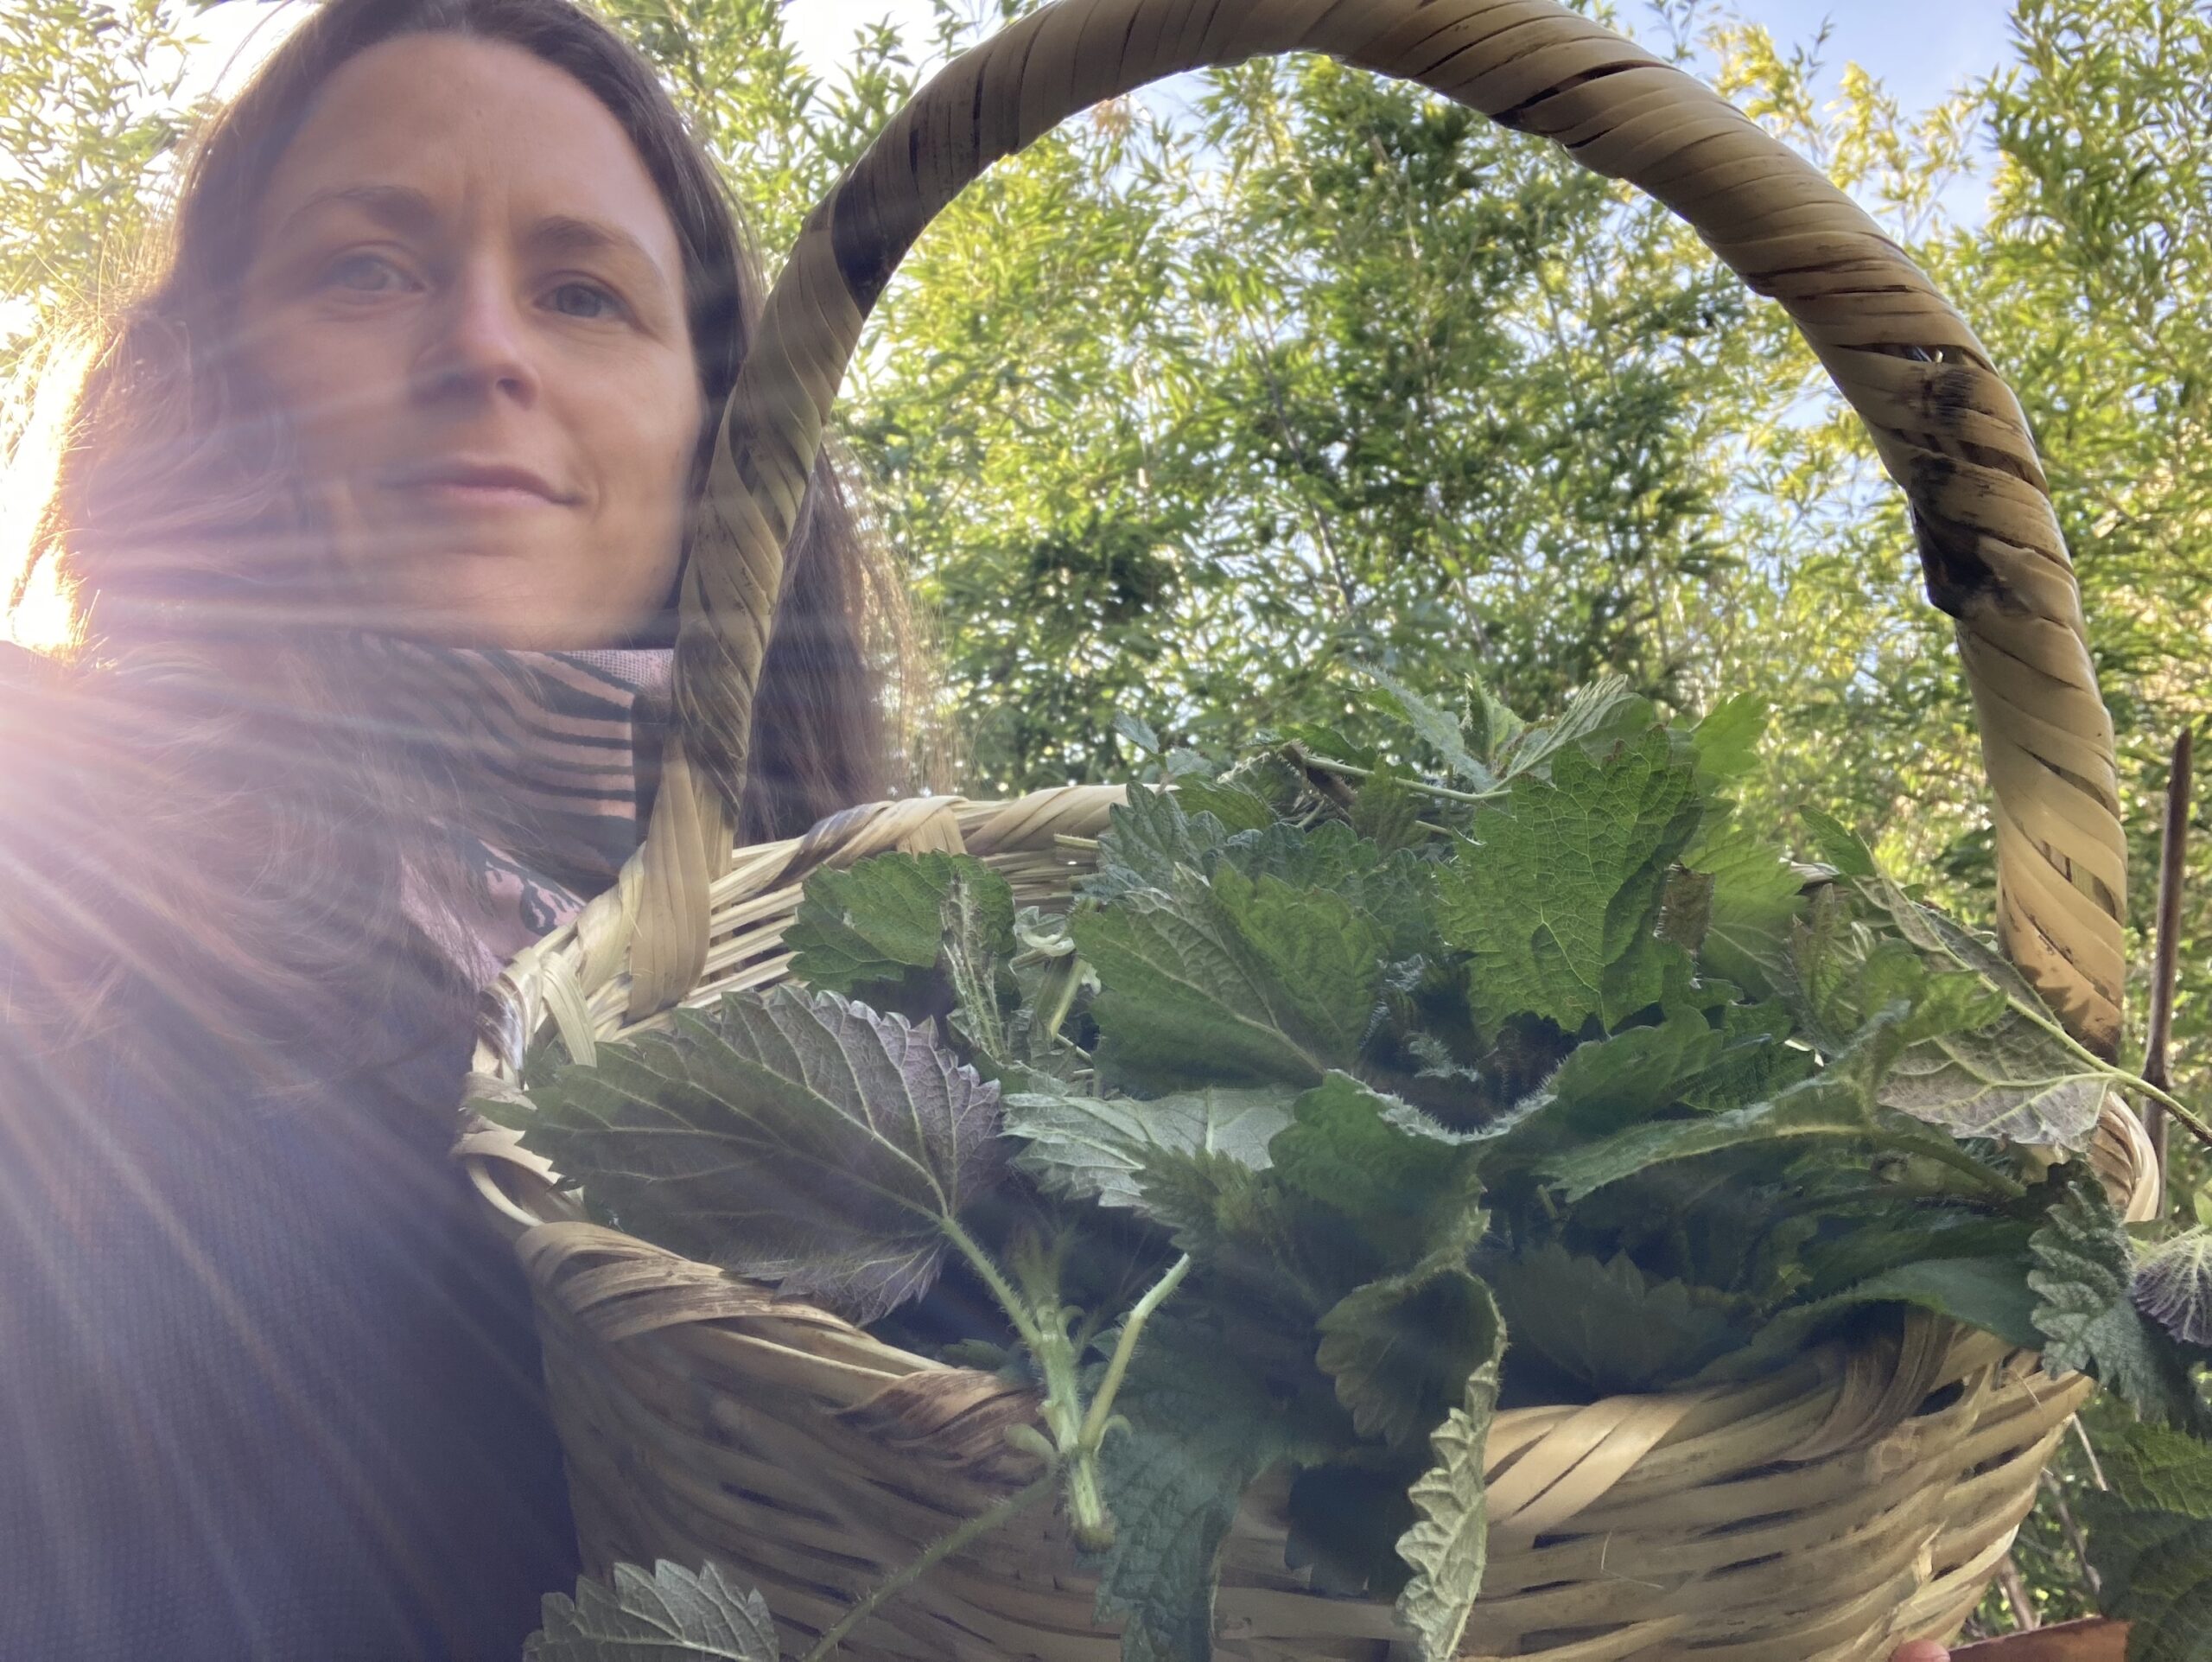 Close up image of Rosa holding a basket of nettles